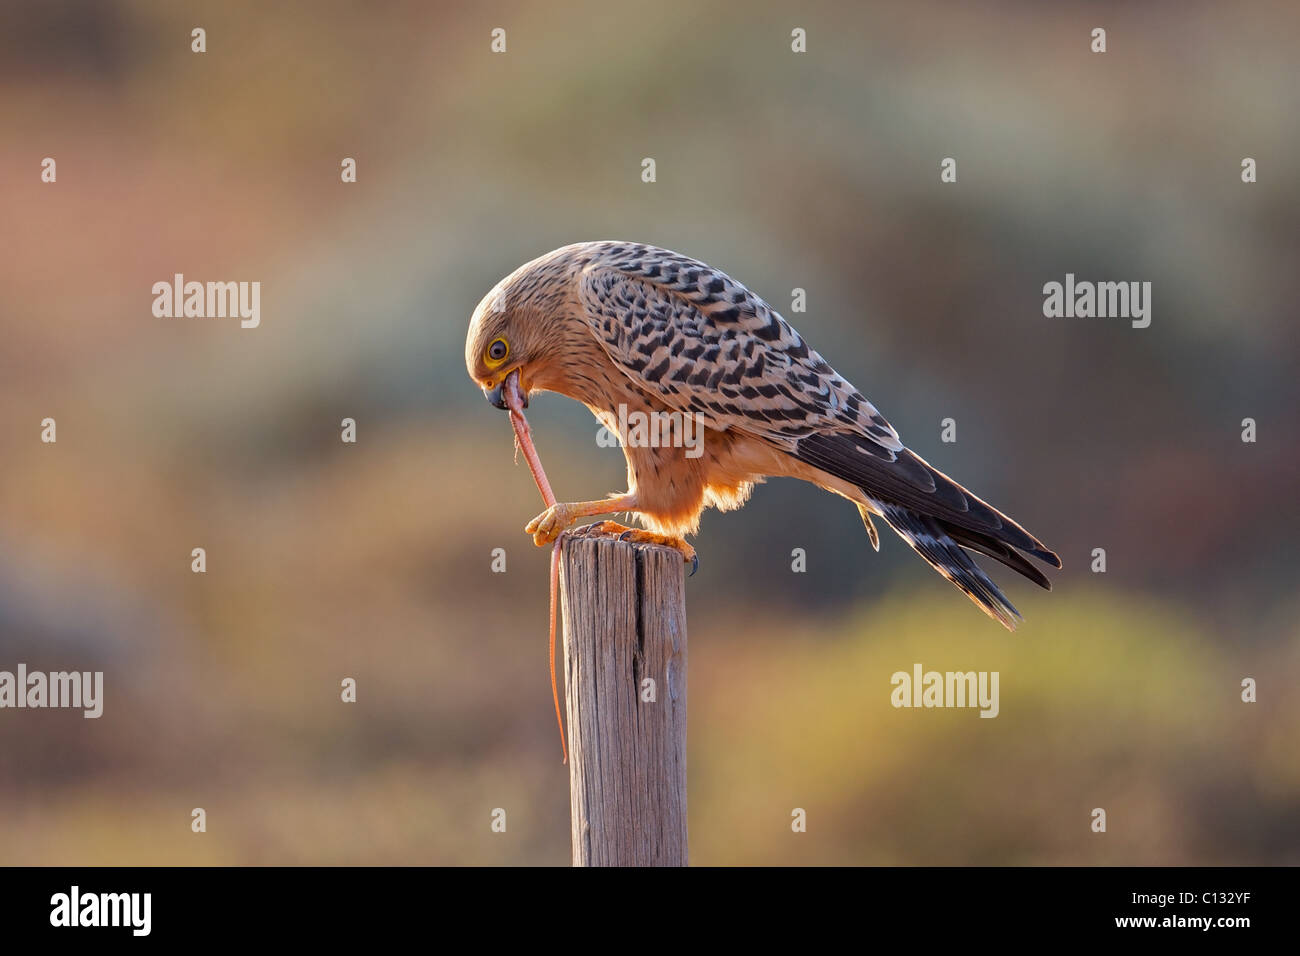 Common Kestrel (Falco tinnunculus) devouring lizard, near Nieuwoudtville, Northern Cape Province, South Africa Stock Photo